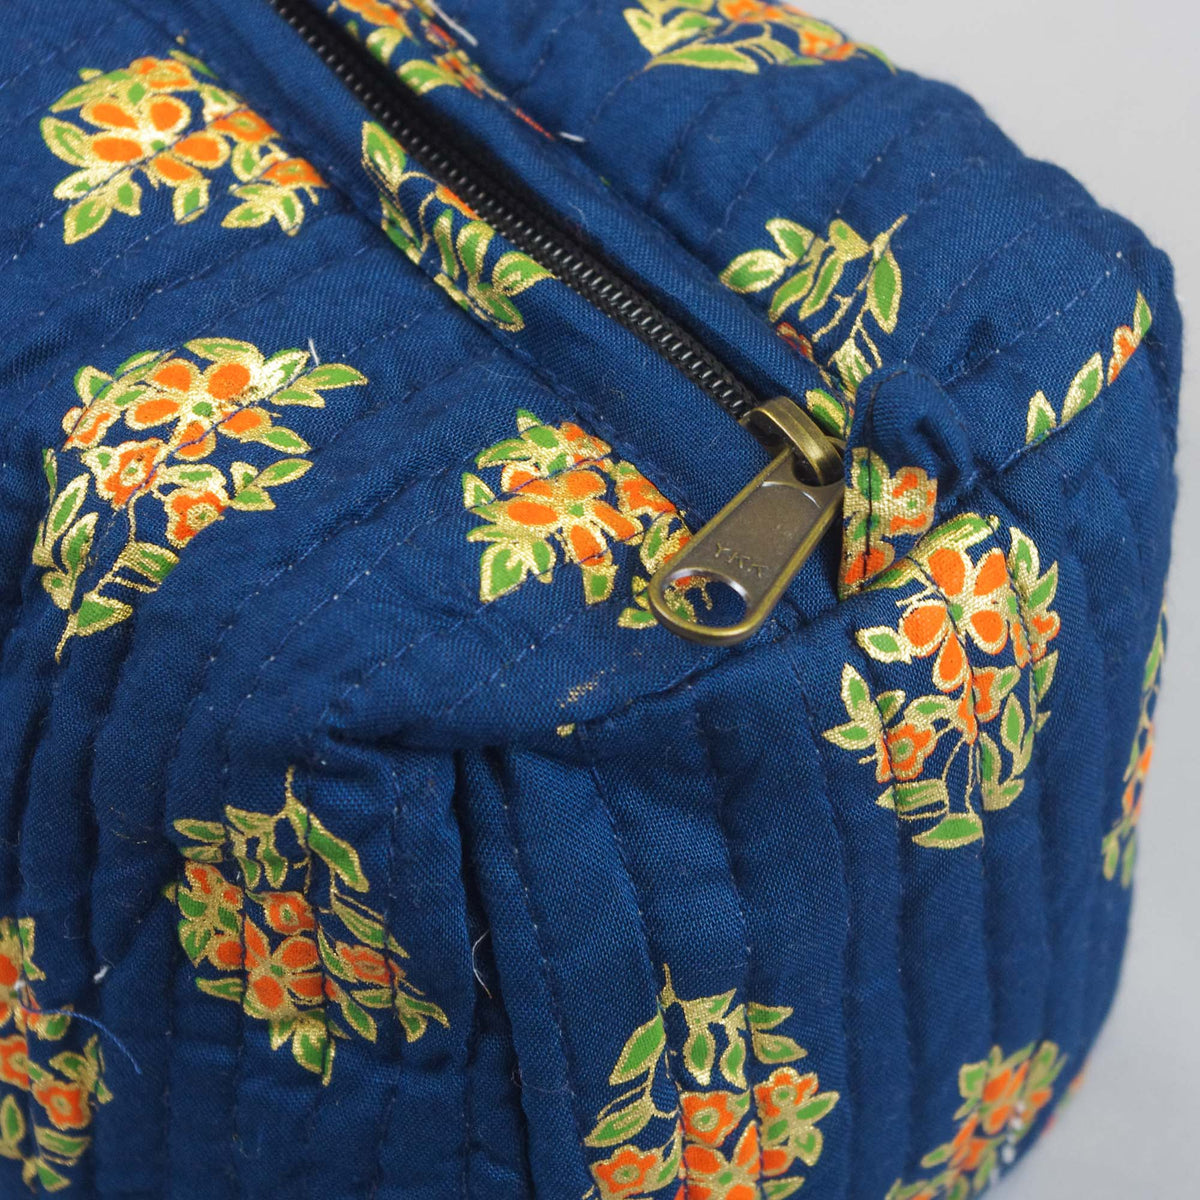 Set of 2 X Block Print Quilted Toiletry Bag - Navy Blue Floral